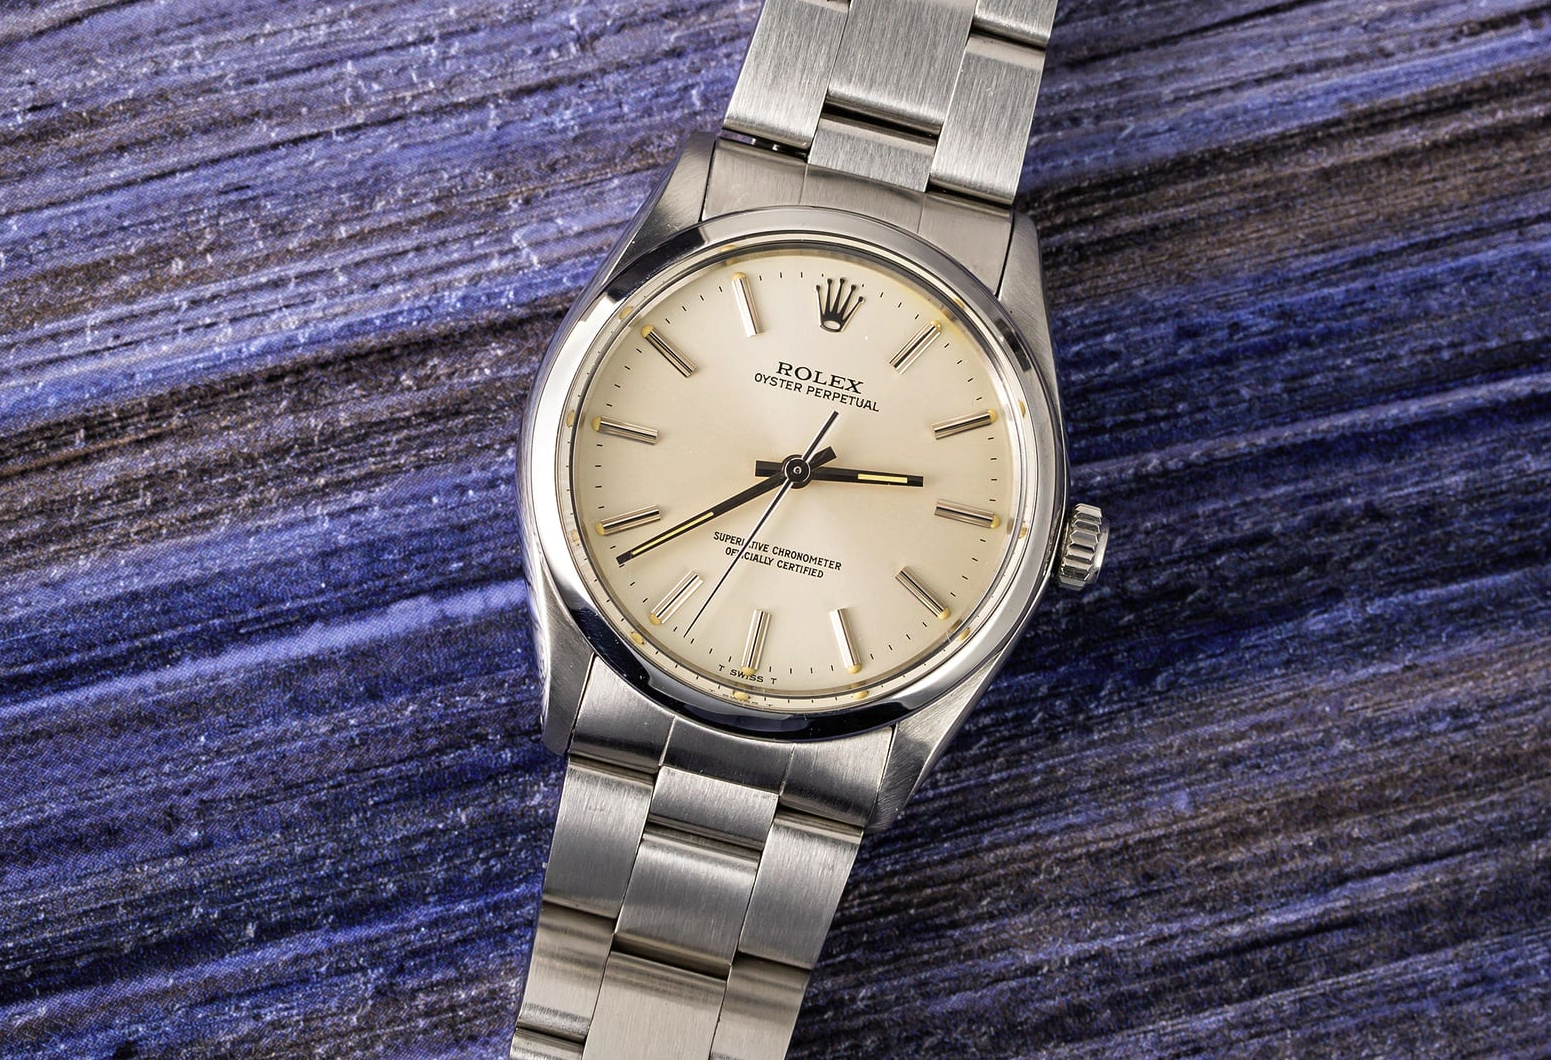 The vintage Rolex Oyster Perpetual 1002.